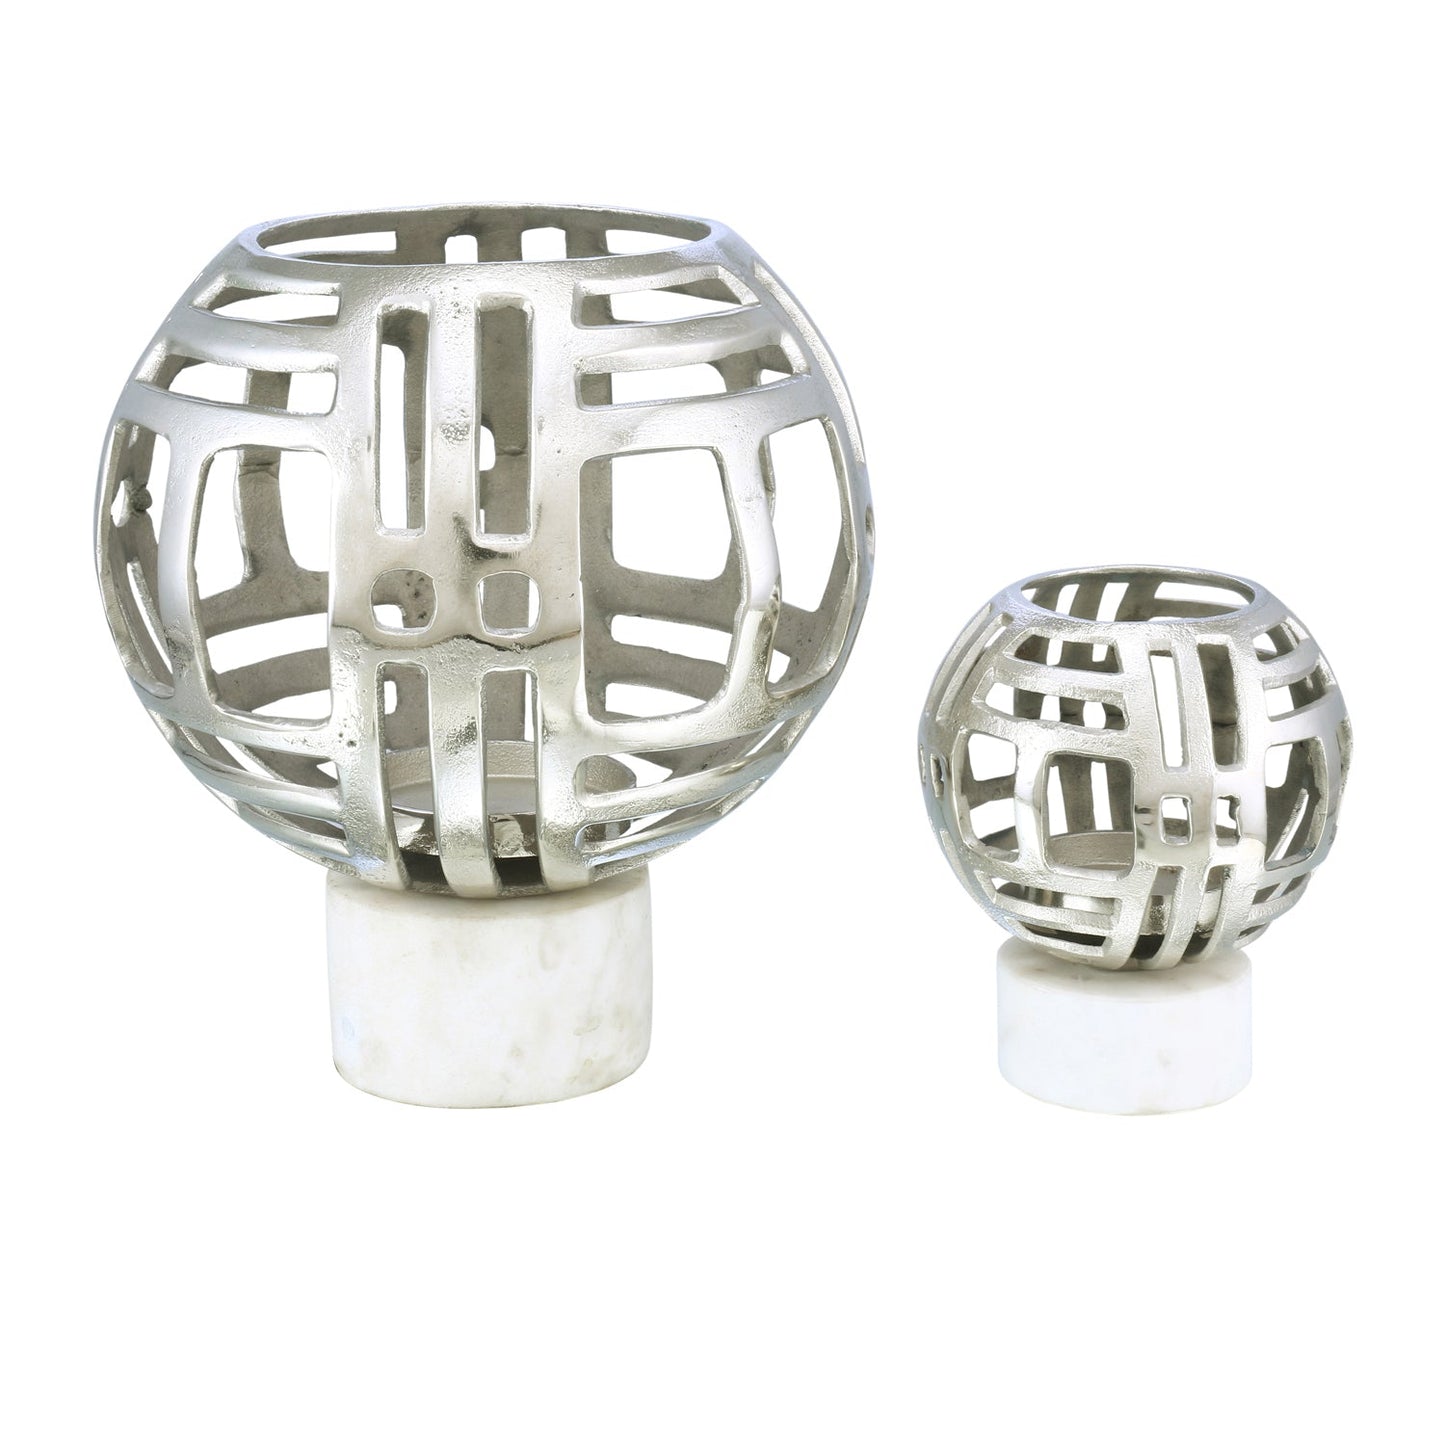 Crestview Collection Finn 13" & 8" 2-Piece Transitional Aluminum And Marble Tea Light Holder In Nickel and White Marble Finish